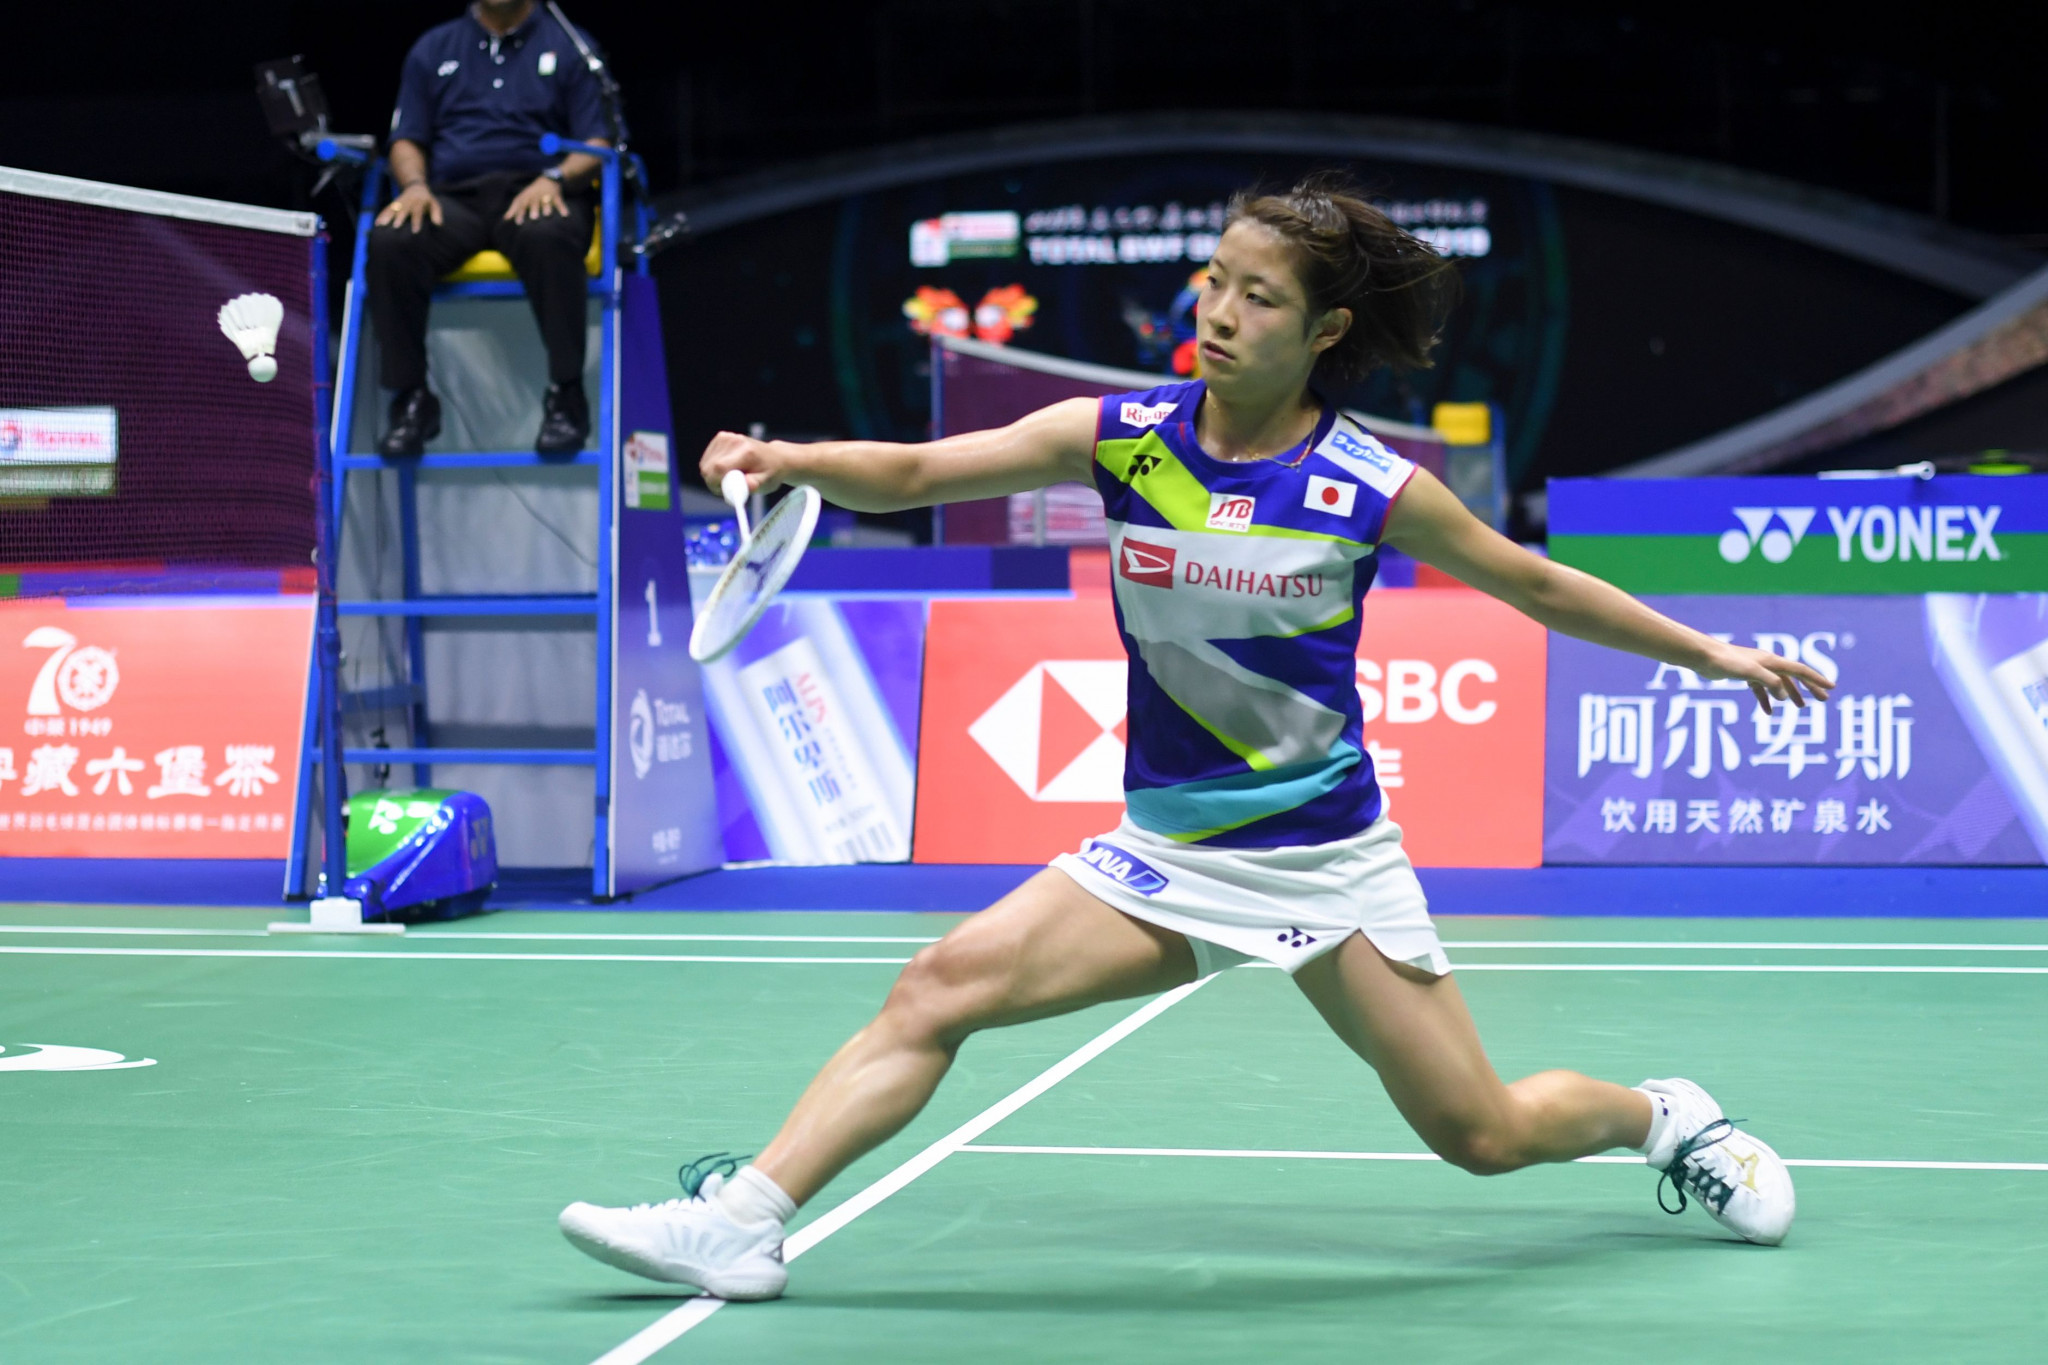 Japan's number one seed Nozomi Okuhara beat fourth seed Ratchanok Intanon of Thailand as she continued her run of not dropping a set at the tournament ©Getty Images